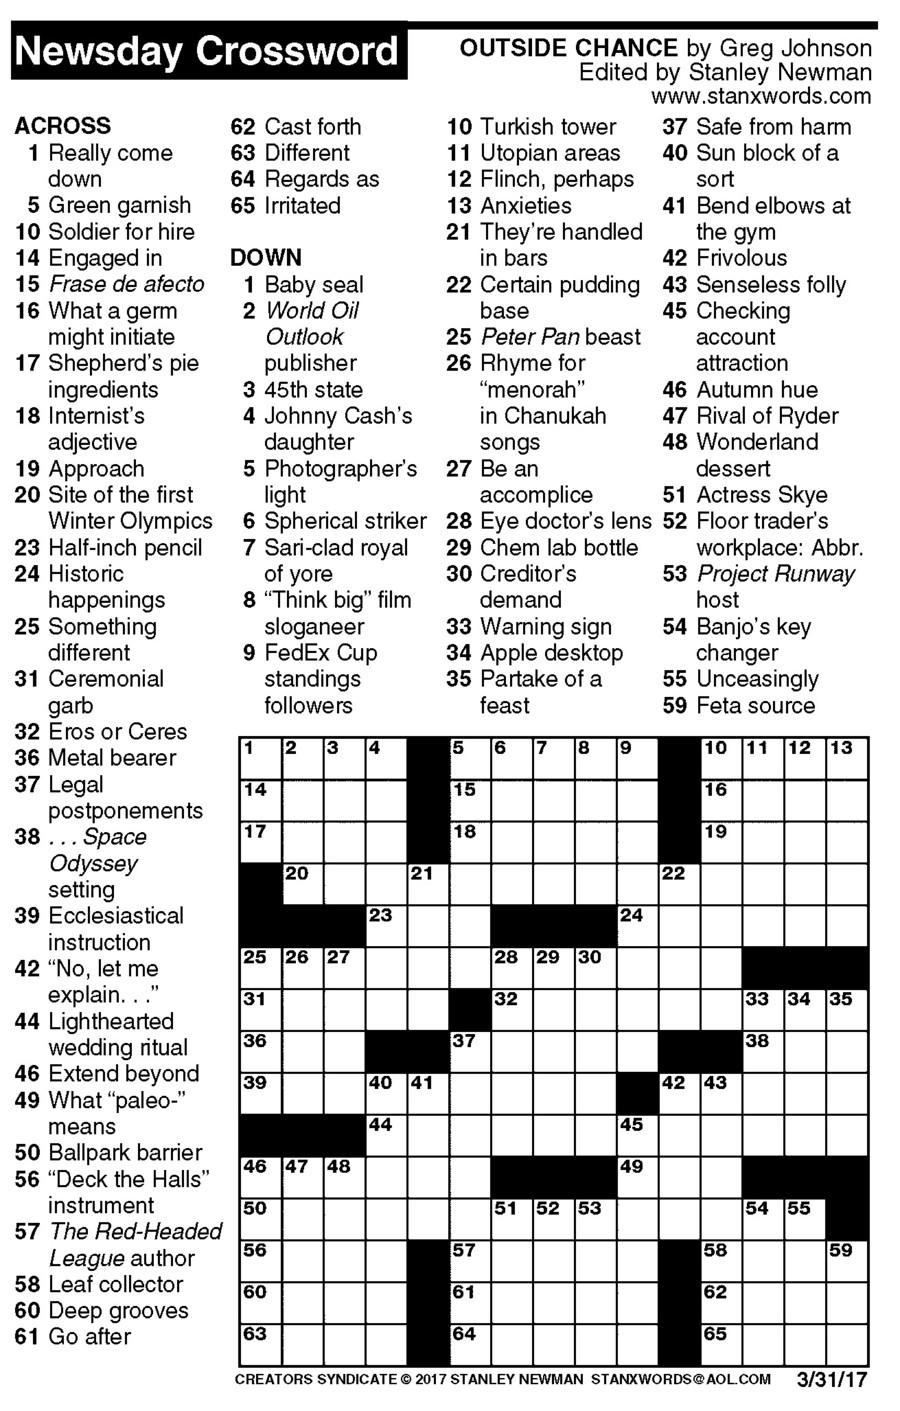 Newsday Crossword Puzzle For Mar 31, 2017,stanley Newman - Printable Crossword Puzzles Newsday